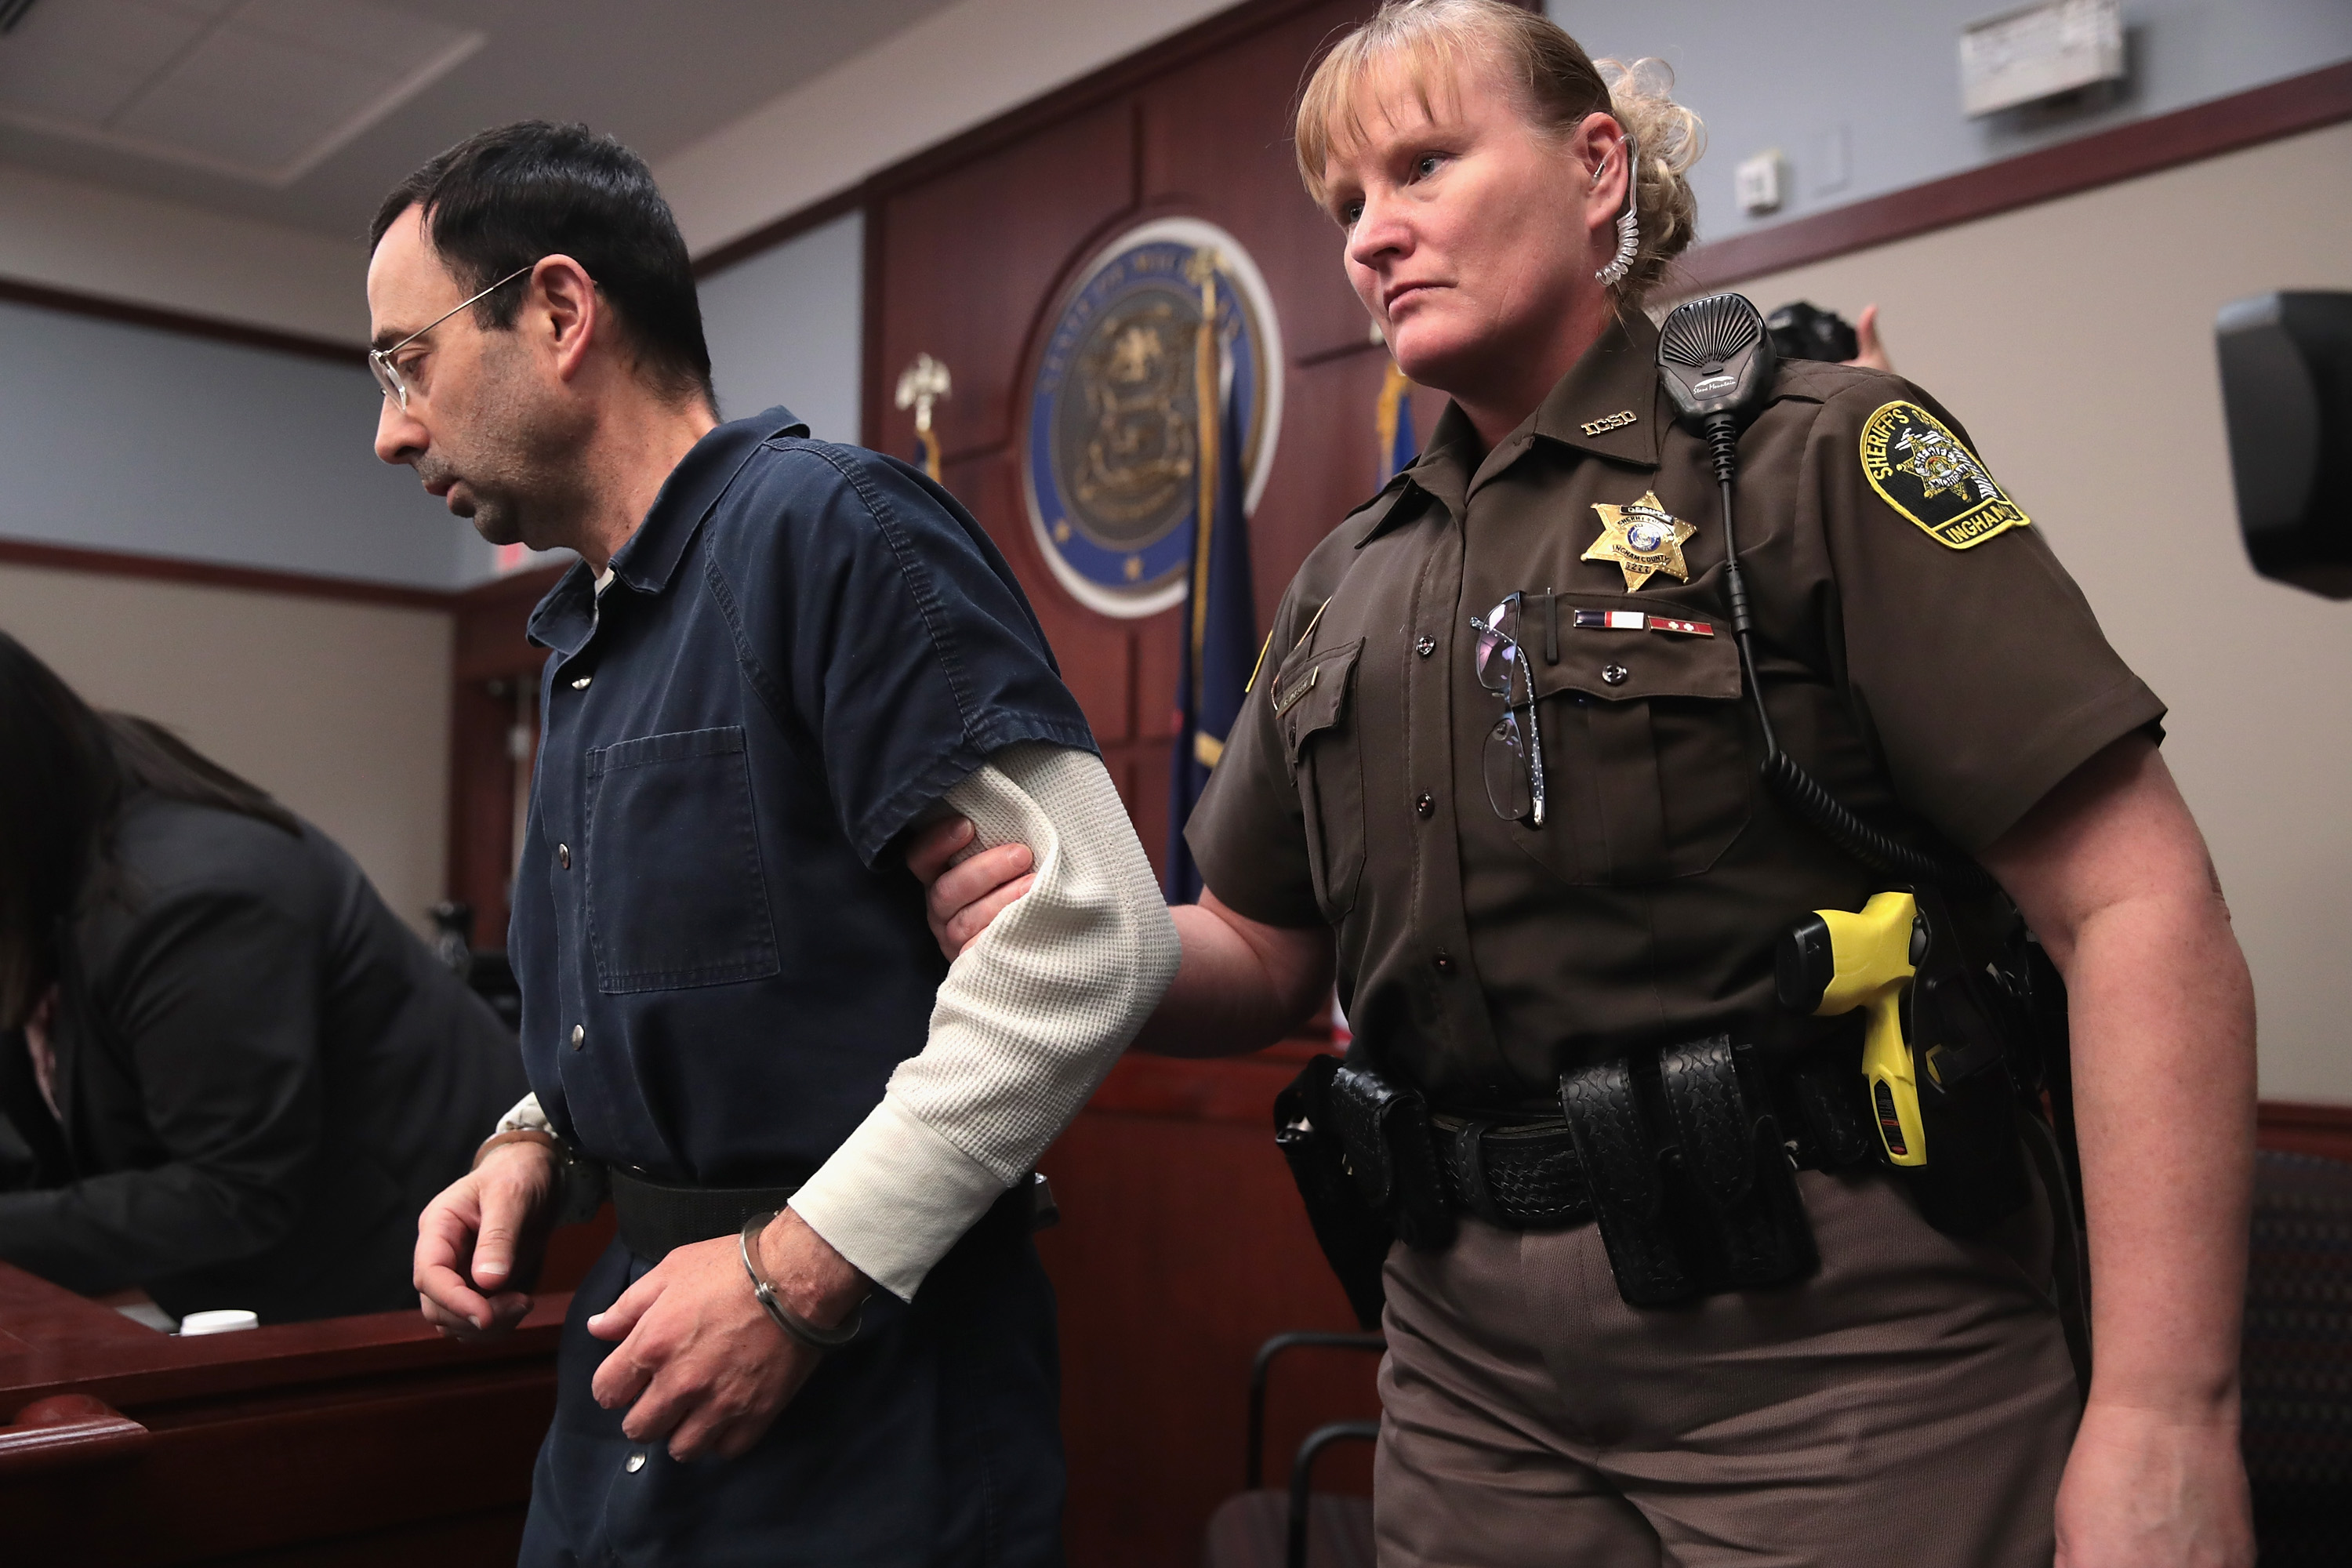 Larry Nassar appears in court to listen to victim impact statements during his sentencing hearing after being accused of molesting more than 100 girls while he was a physician for USA Gymnastics and Michigan State University on Jan. 17, 2018 in Lansing, Michigan. (Scott Olson—Getty Images)